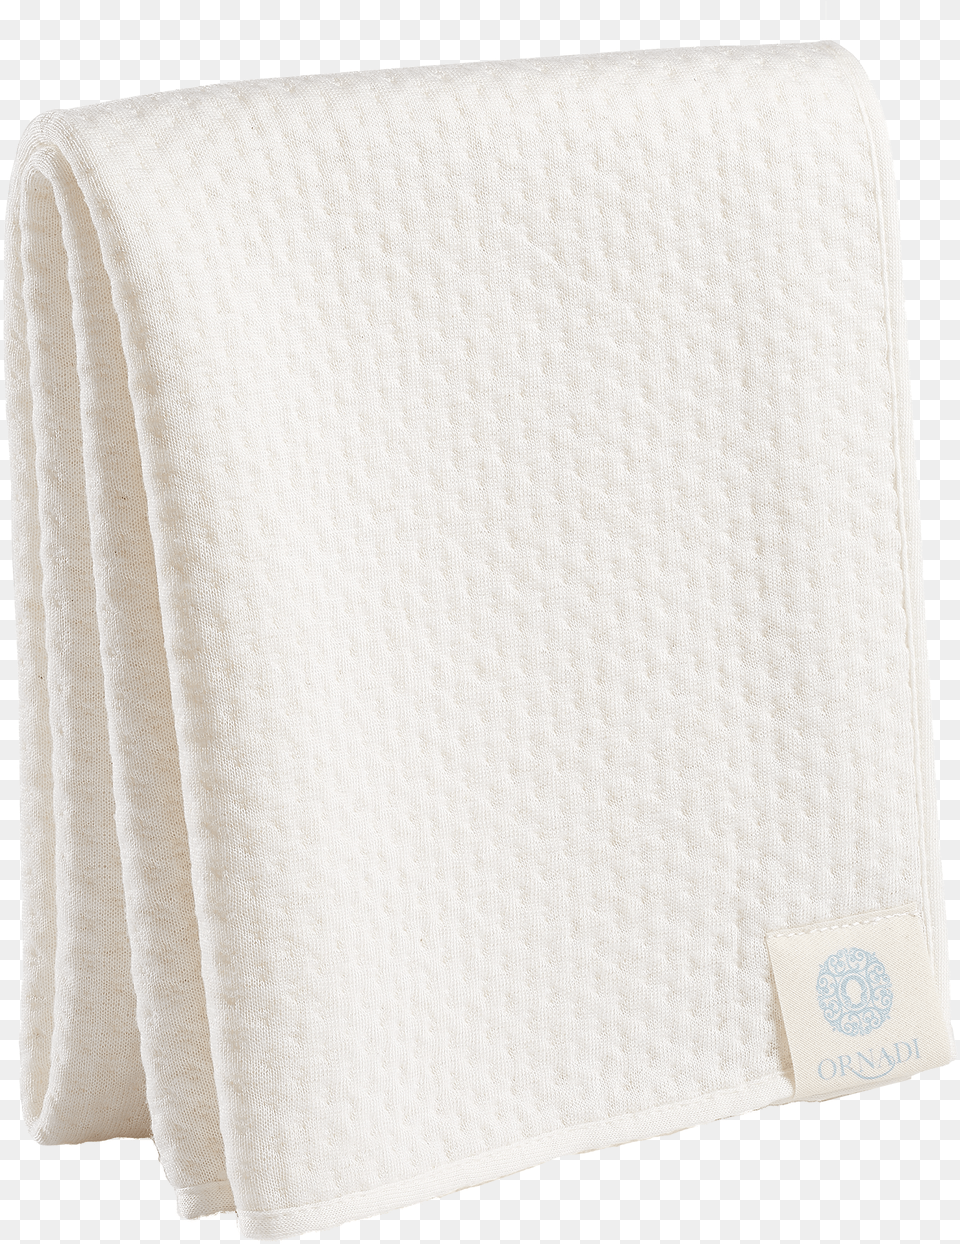 White Face Towel Download Tablecloth, Blanket Png Image